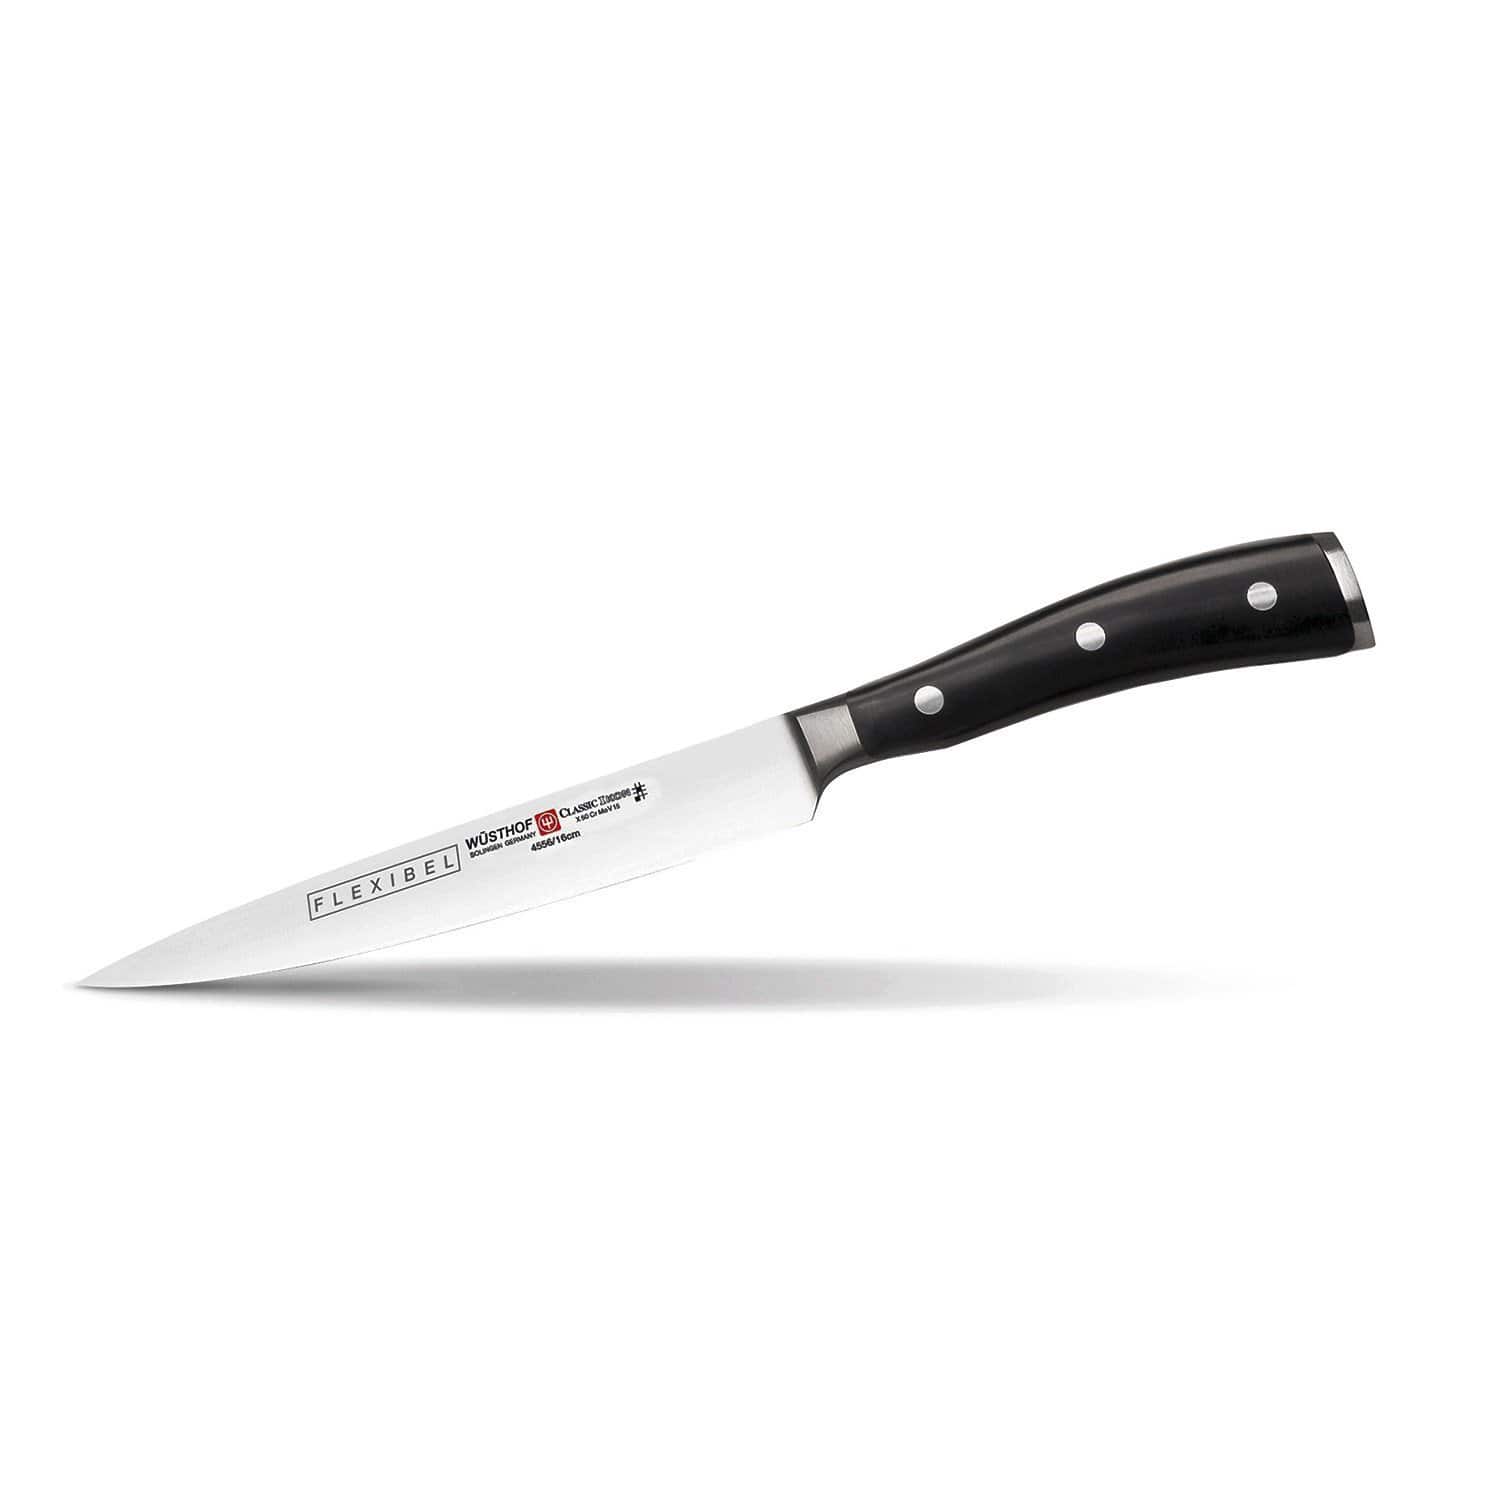 Wusthof Classic Ikon Fillet Knife - Black and Silver - 4556-7 - Jashanmal Home